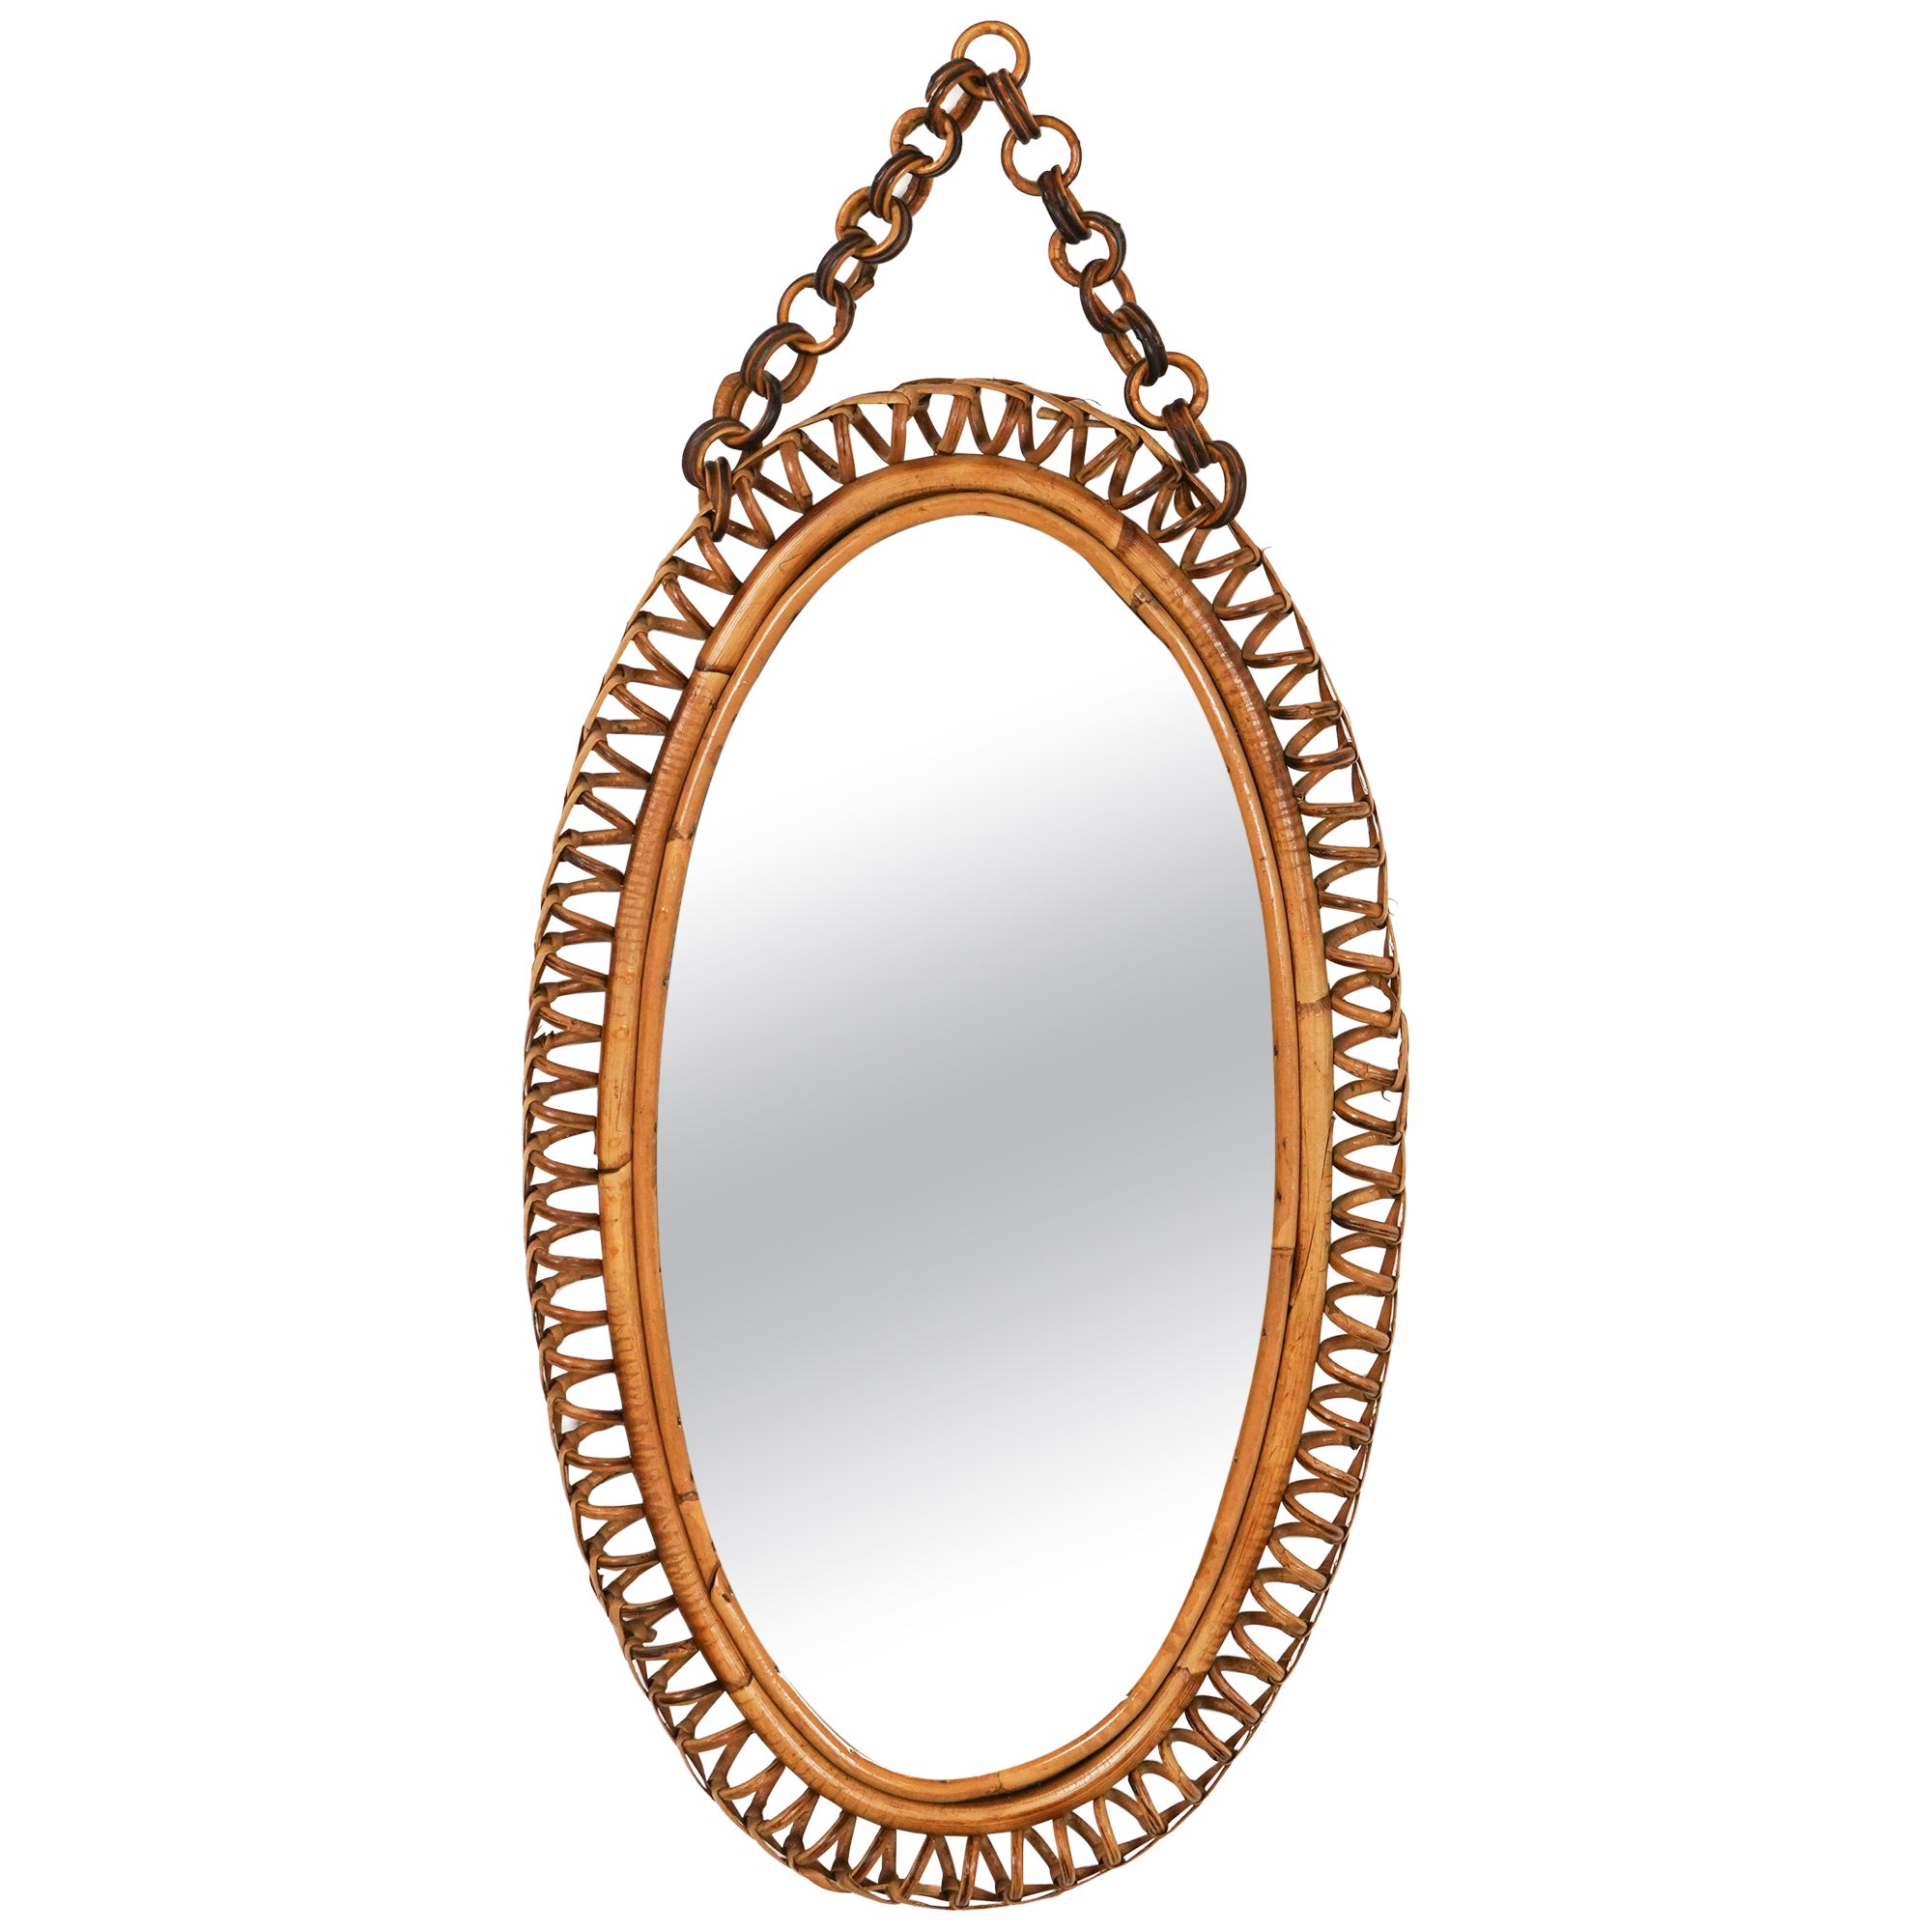 Midcentury Rattan & Bamboo Oval Wall Mirror with Chain, Italy 1960s For Sale